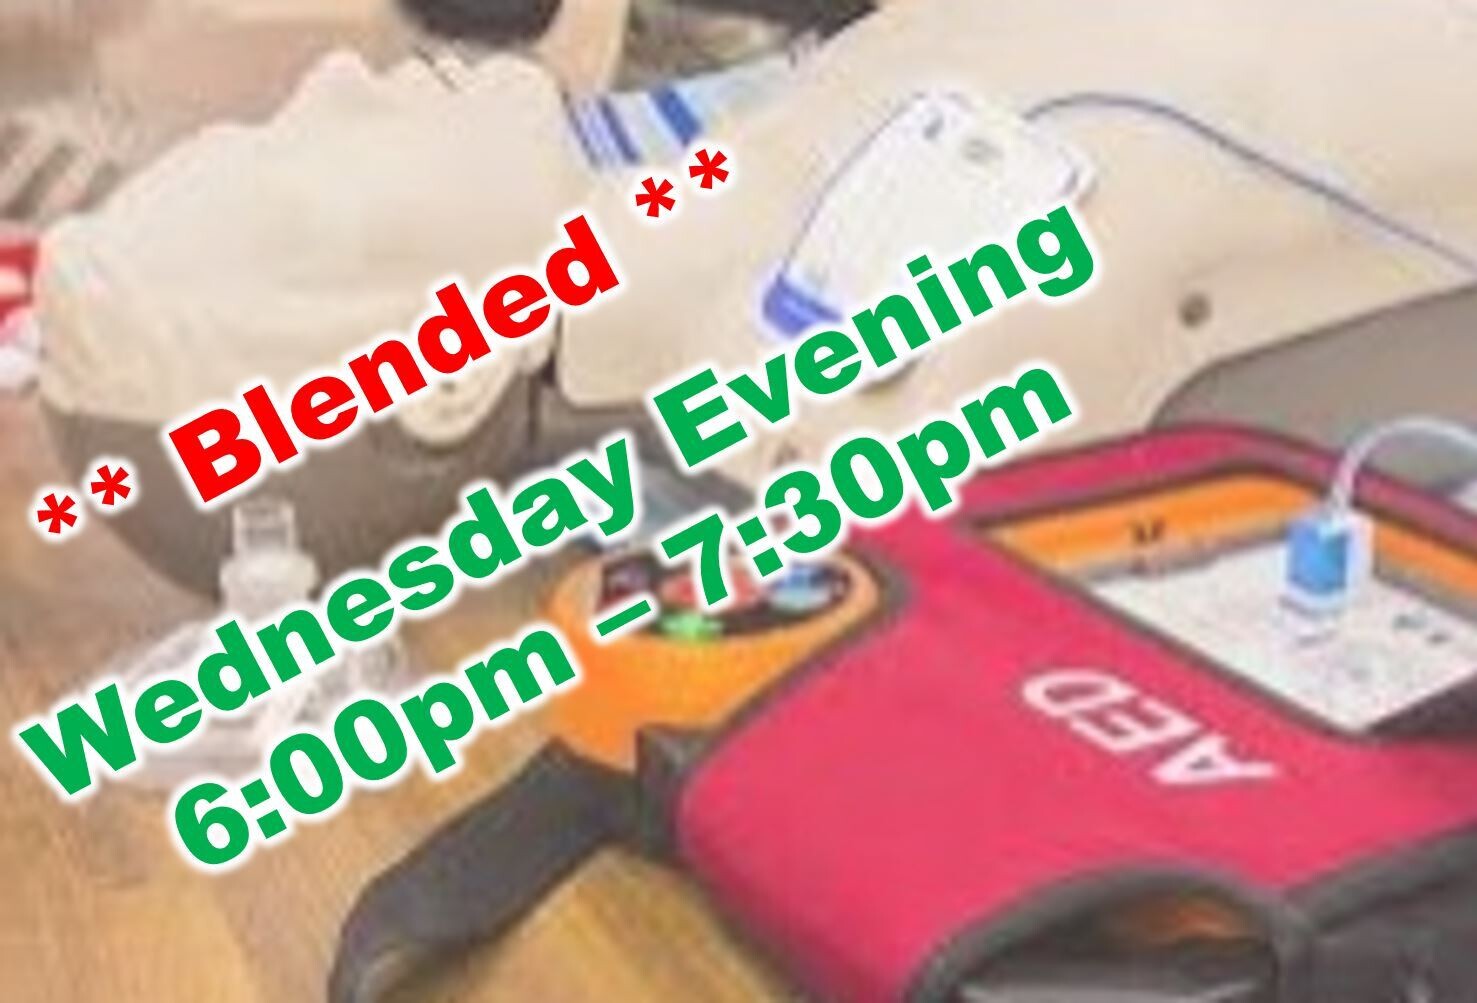 May 25th, 2022 (Wednesday) 6:00pm-7:30pm CPR Class